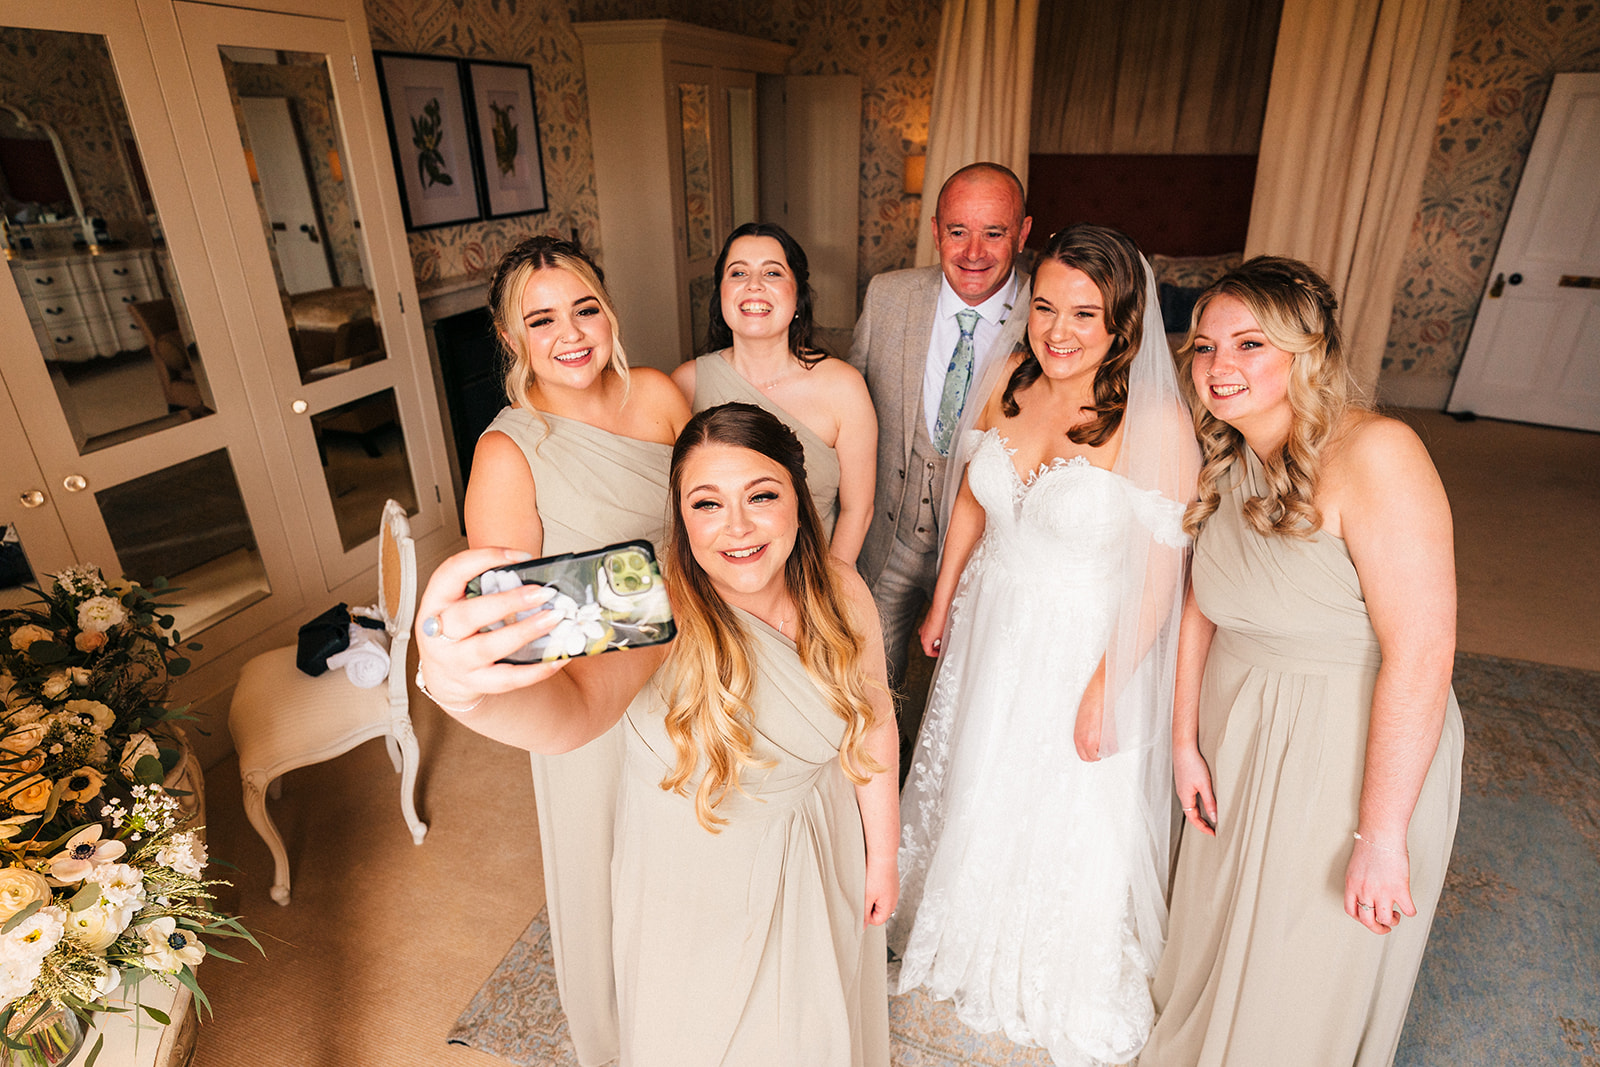 A bridesmaid doing a bridal party selfie before the start of the wedding ceremony